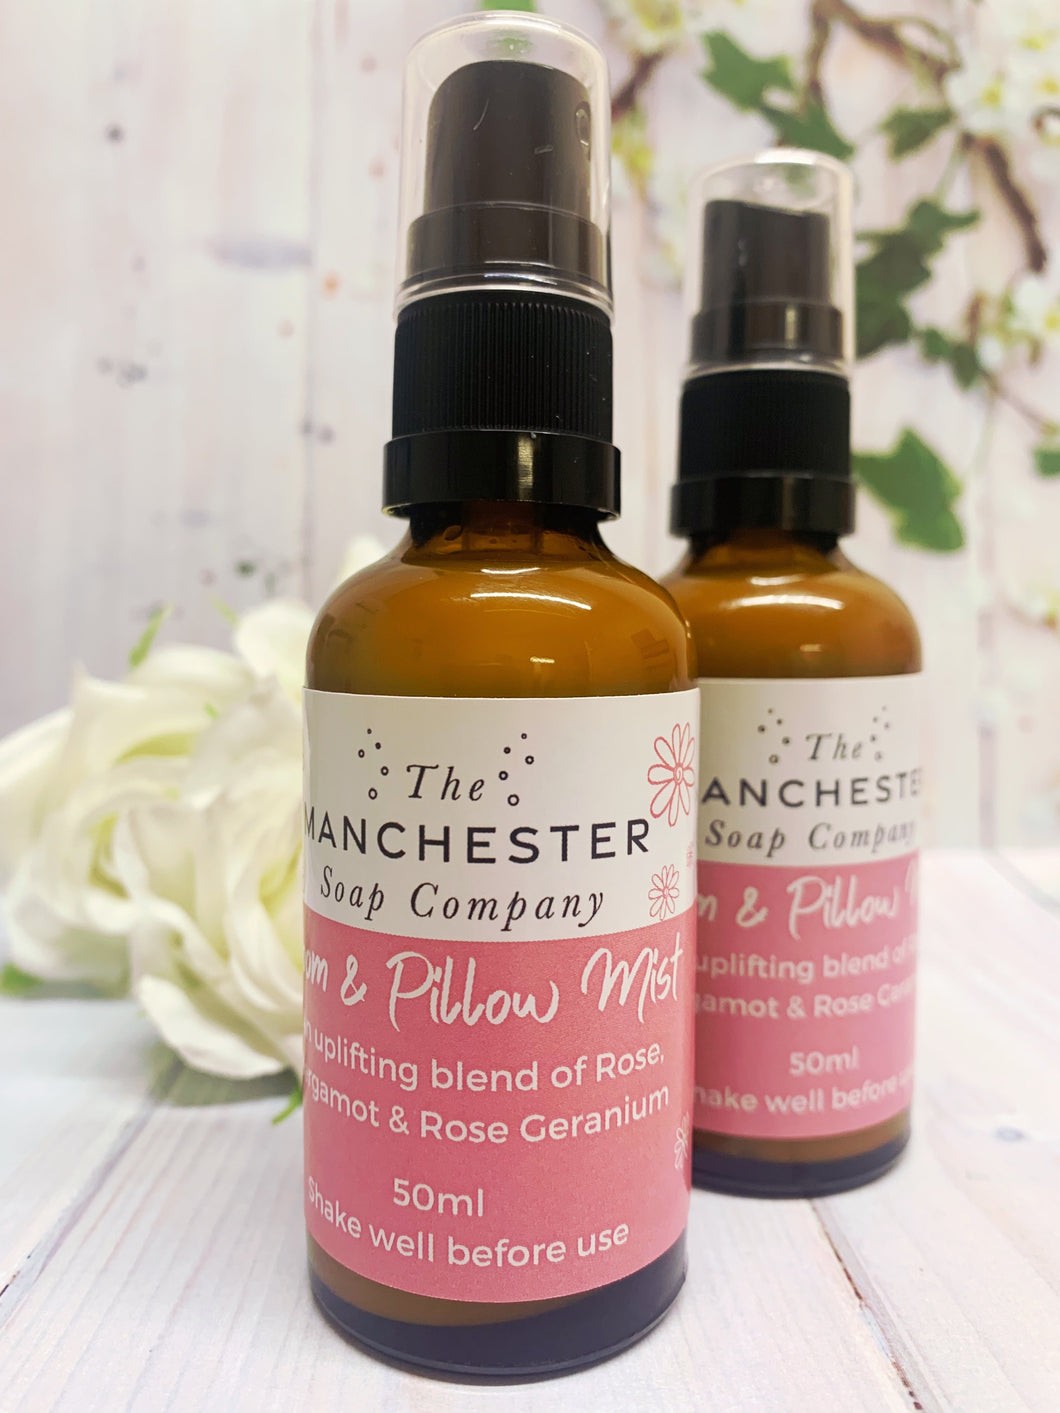 Tranquility Room & Pillow Mist